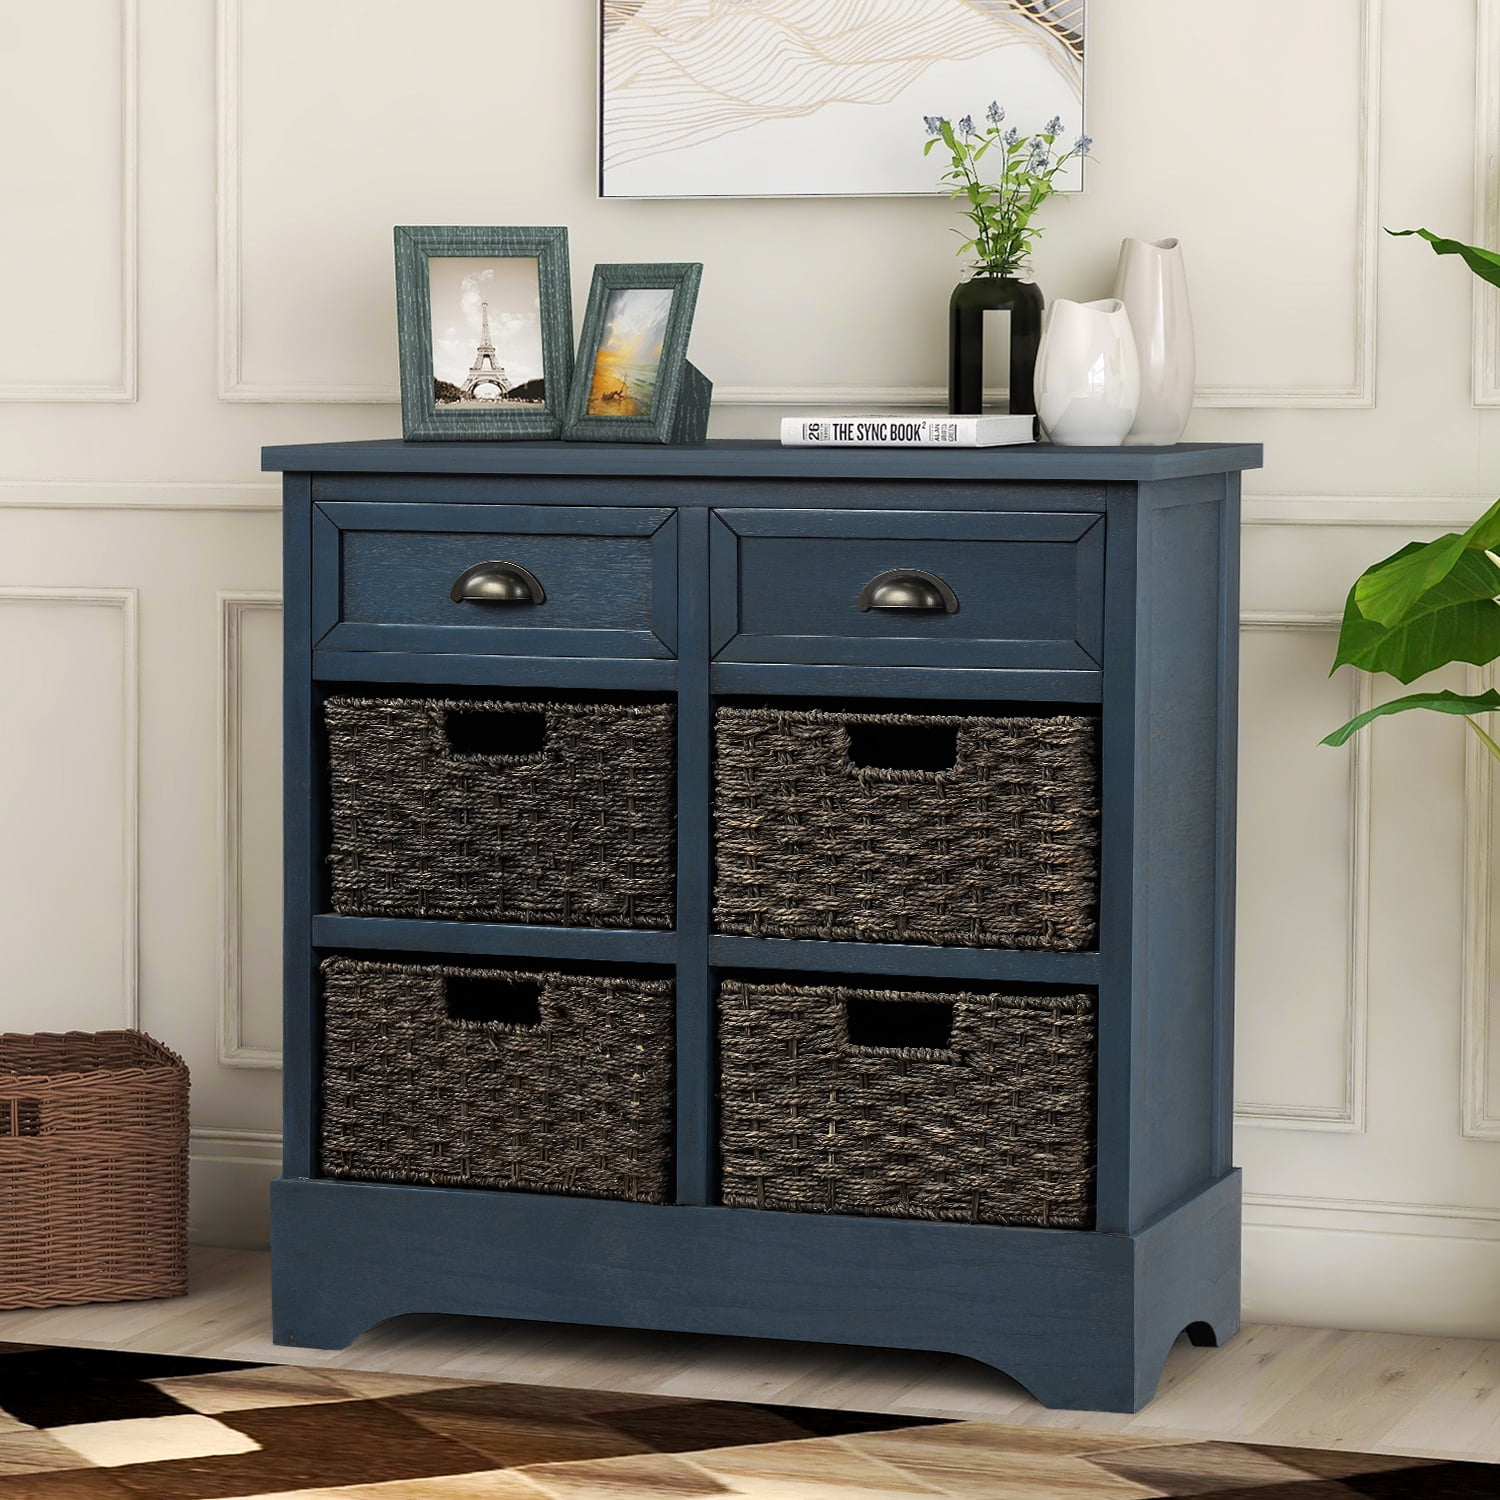 Details about   Shabby Chic Wicker Baskets Wood Drawer Cupboard Storage Cabinet Bedside Table UK 